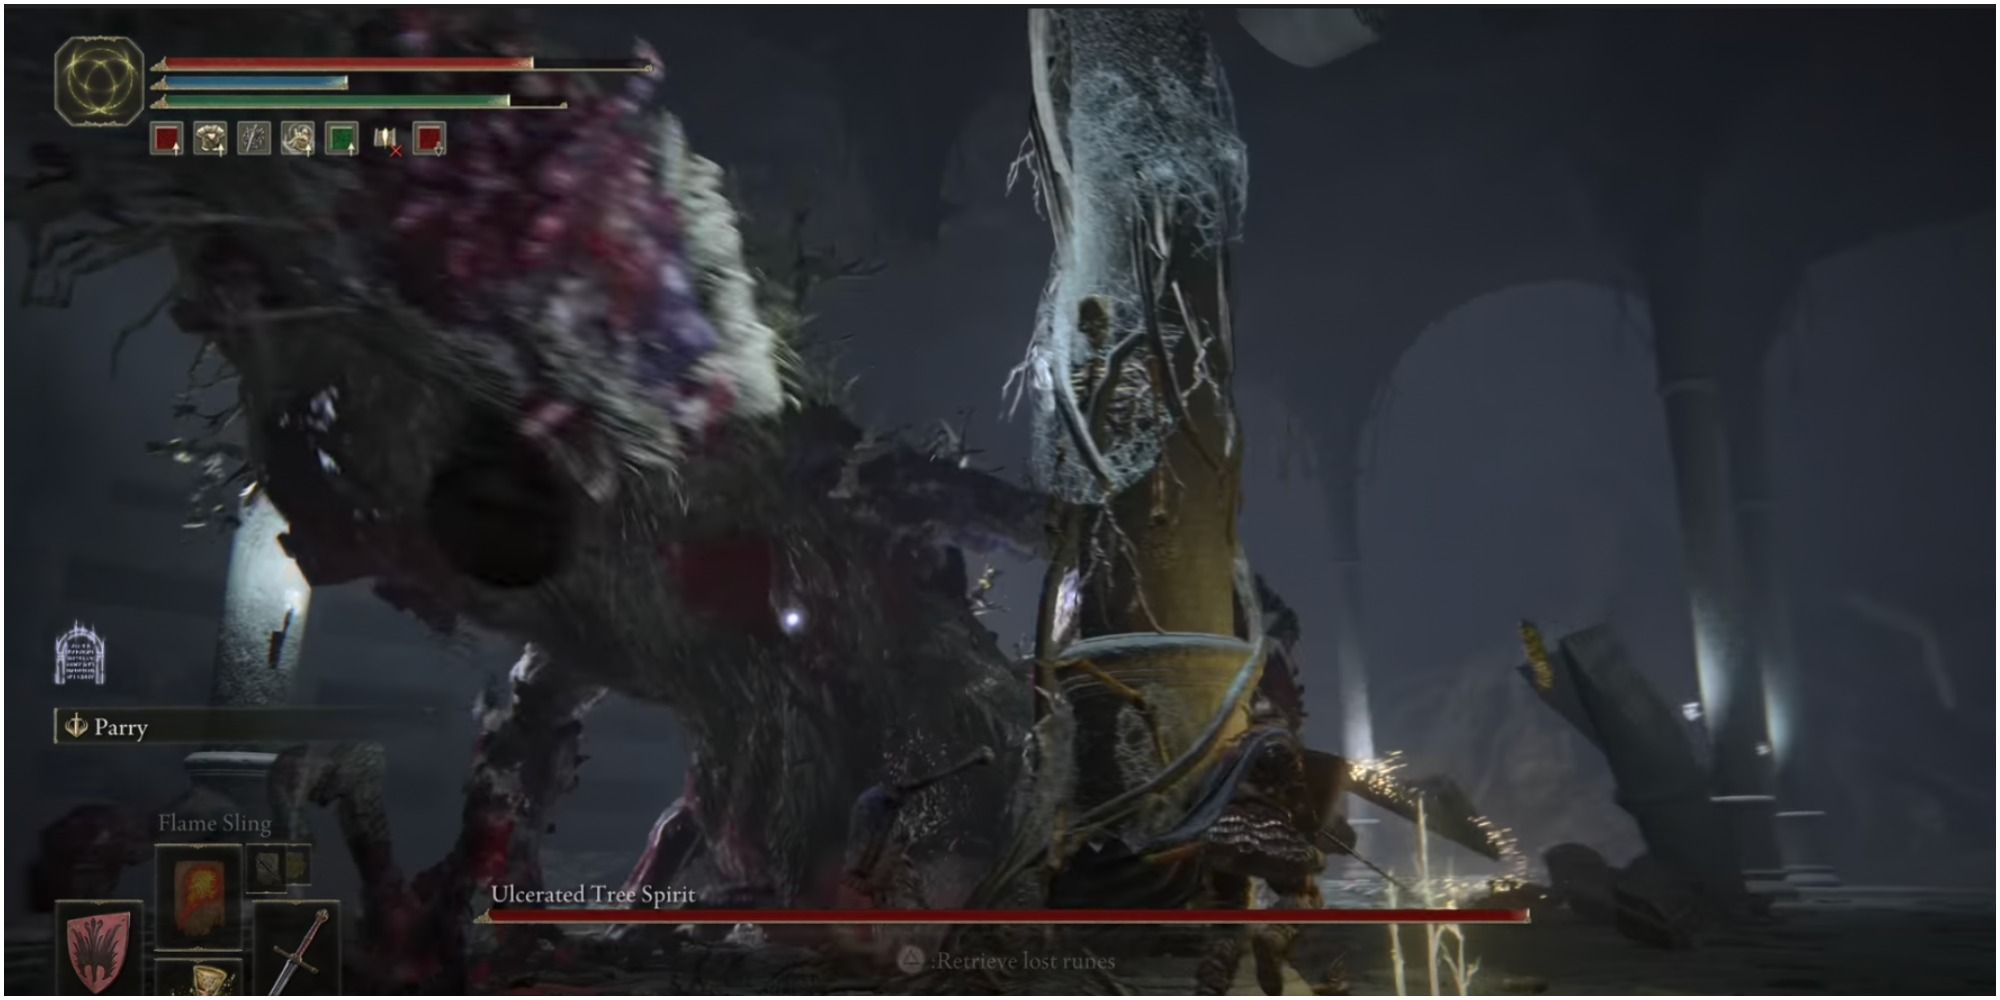 Elden Ring Ulcerated Tree Spirit boss at Giants' Mountaintops Catacombs